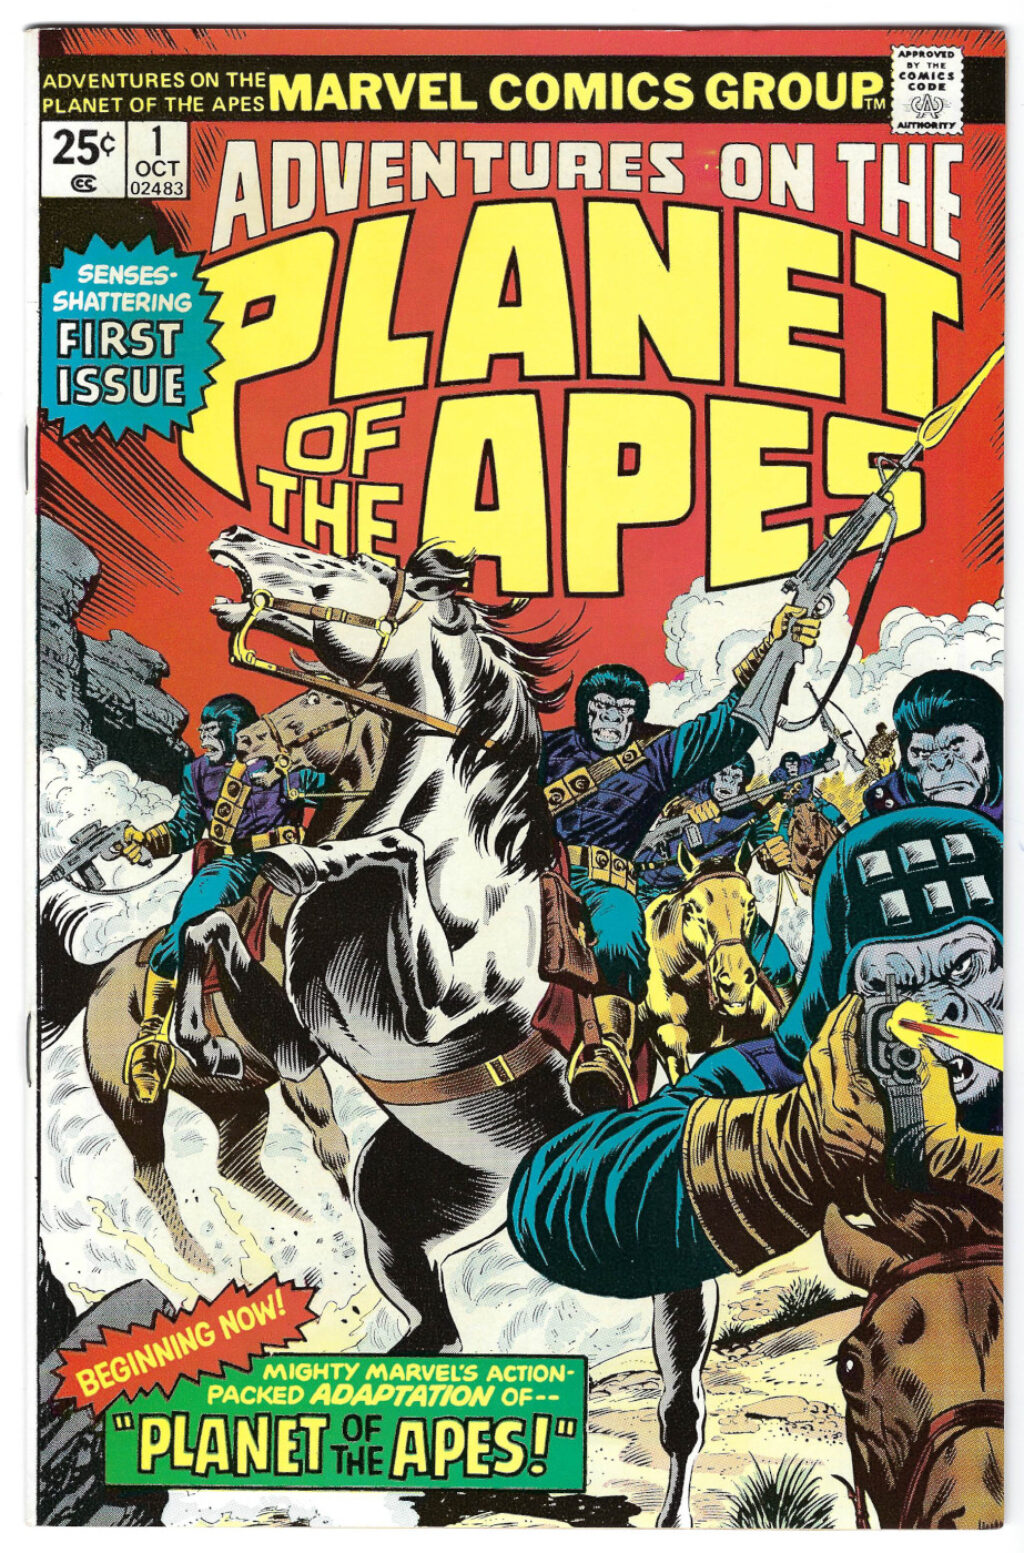 Marvel Comics Adventures on the Planet of the Apes #1: 1st Appearance in Comic Book Format 1